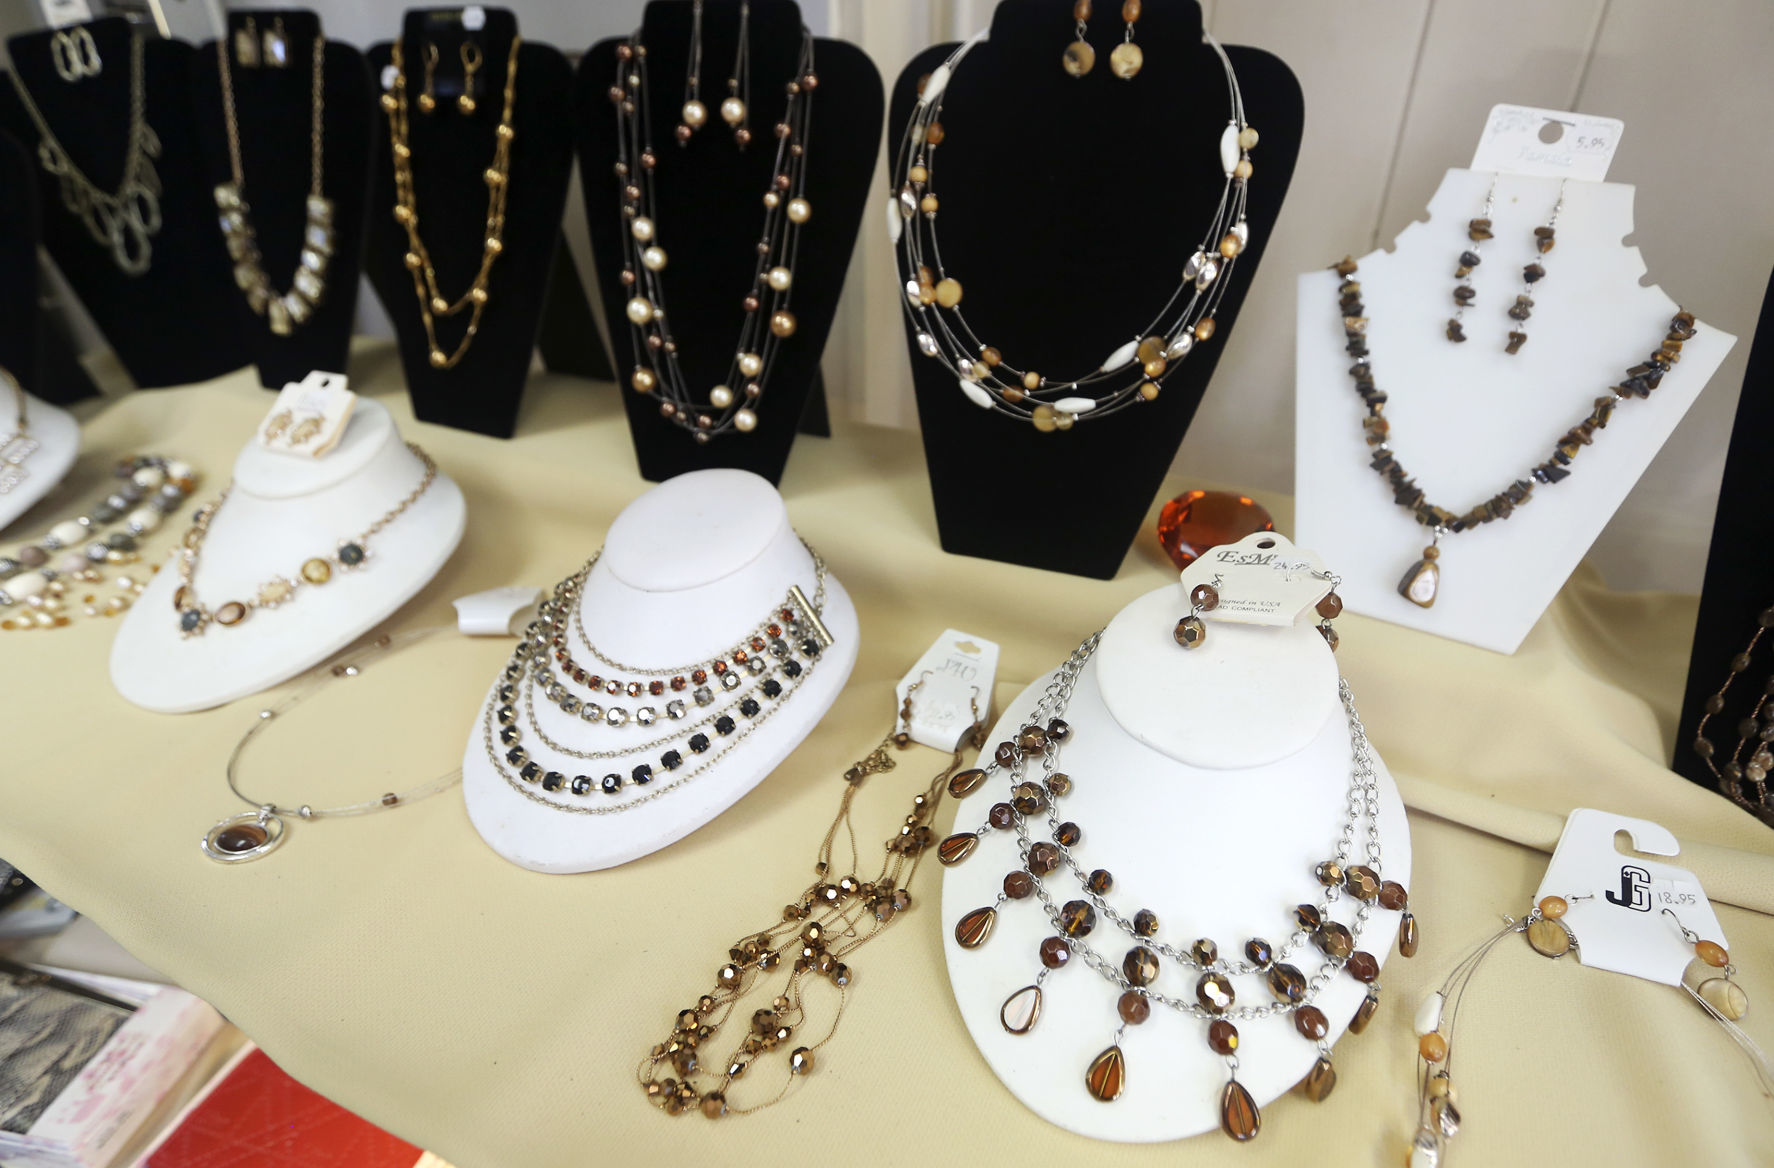 Jewelry for sale at The Jewelry Box in Dubuque on Thursday, June 25, 2020. PHOTO CREDIT: NICKI KOHL